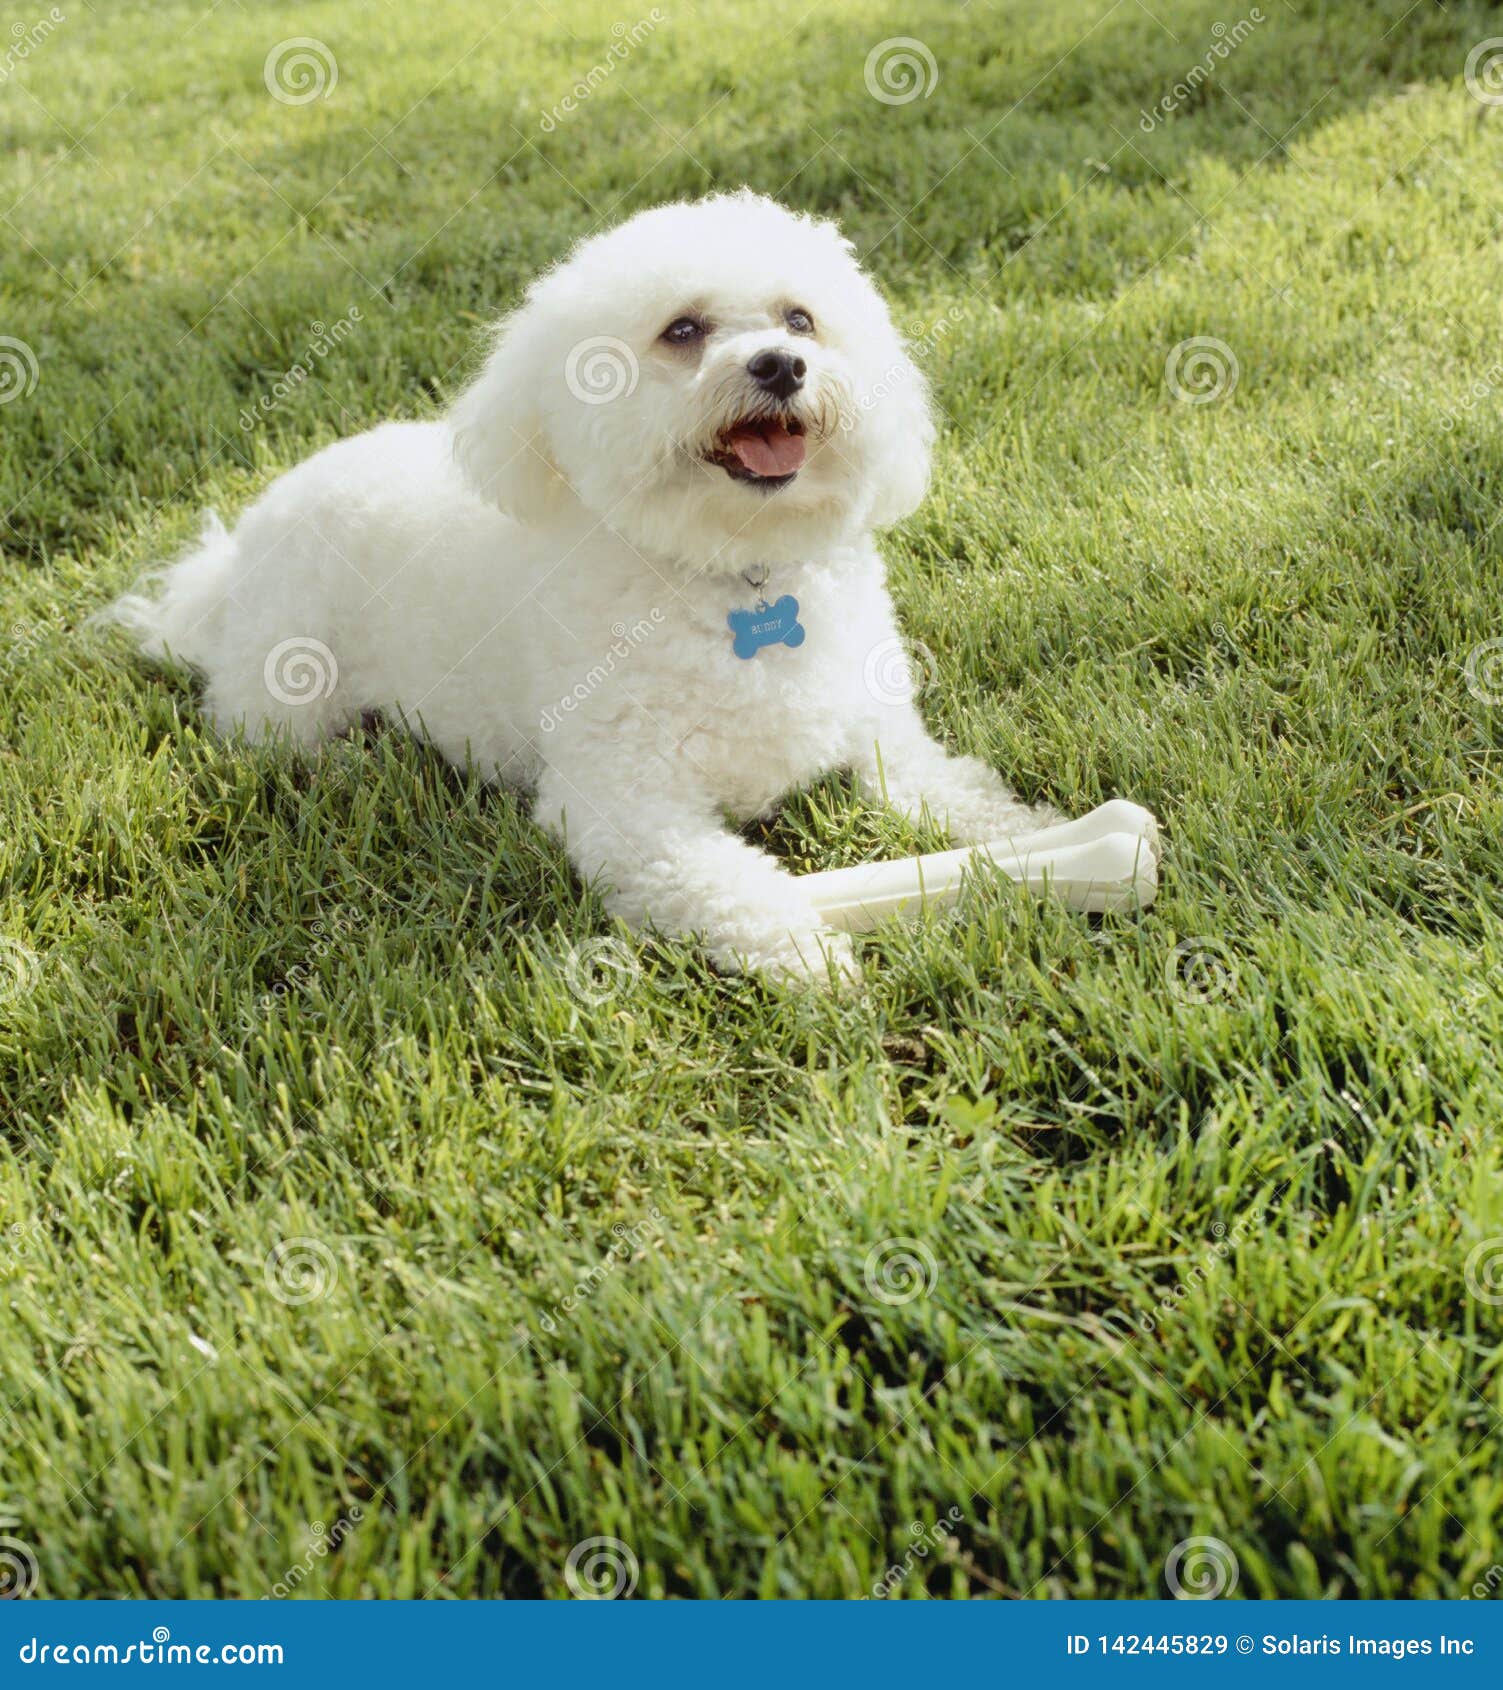 Cute, Happy, Bichon Frise Dog With Clean White Fur Playing